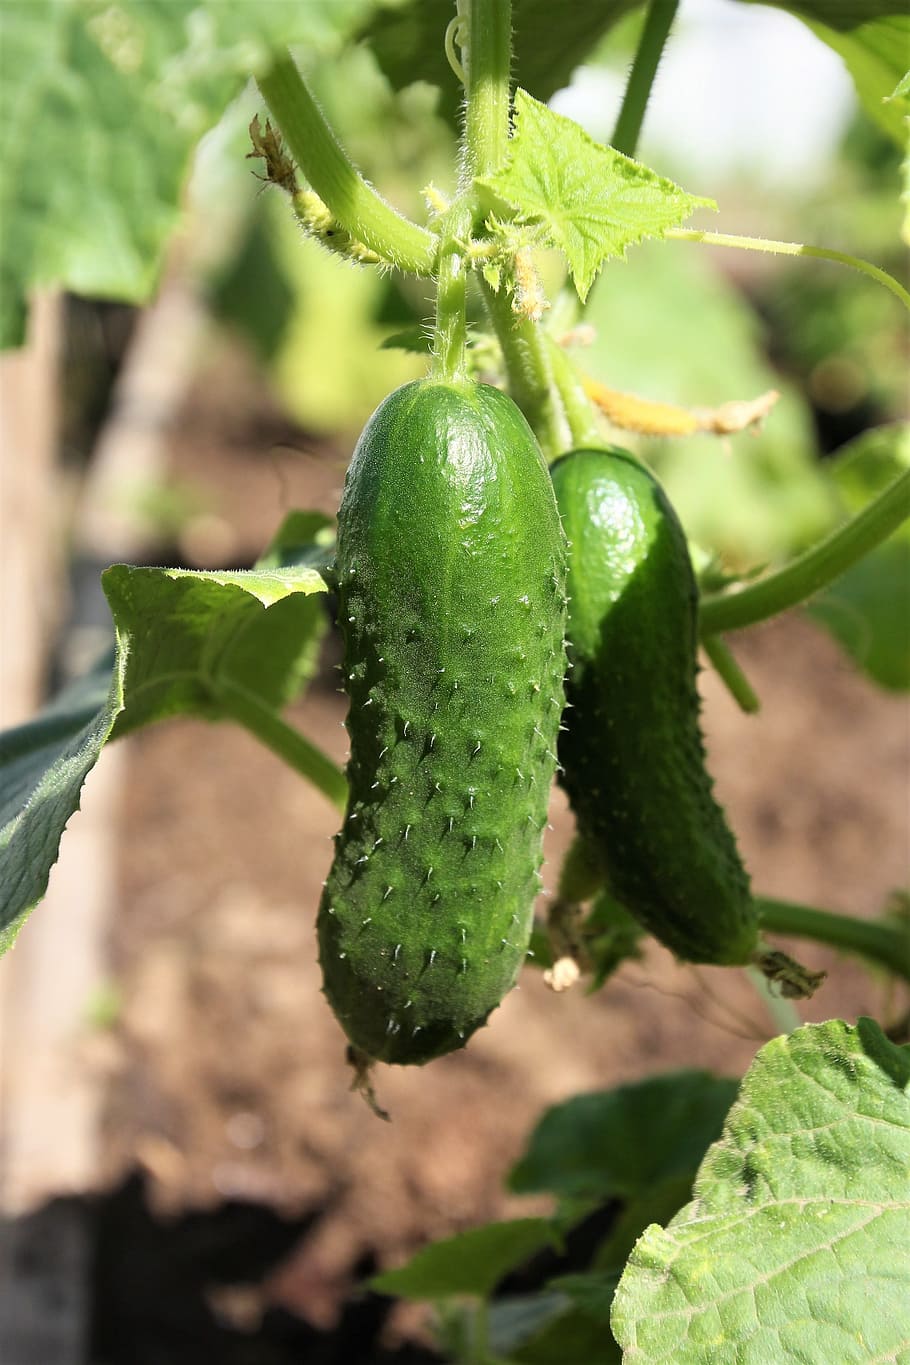 cucumbers, cucumber, green, vegetables, harvest, dacha, food, green color, leaf, food and drink